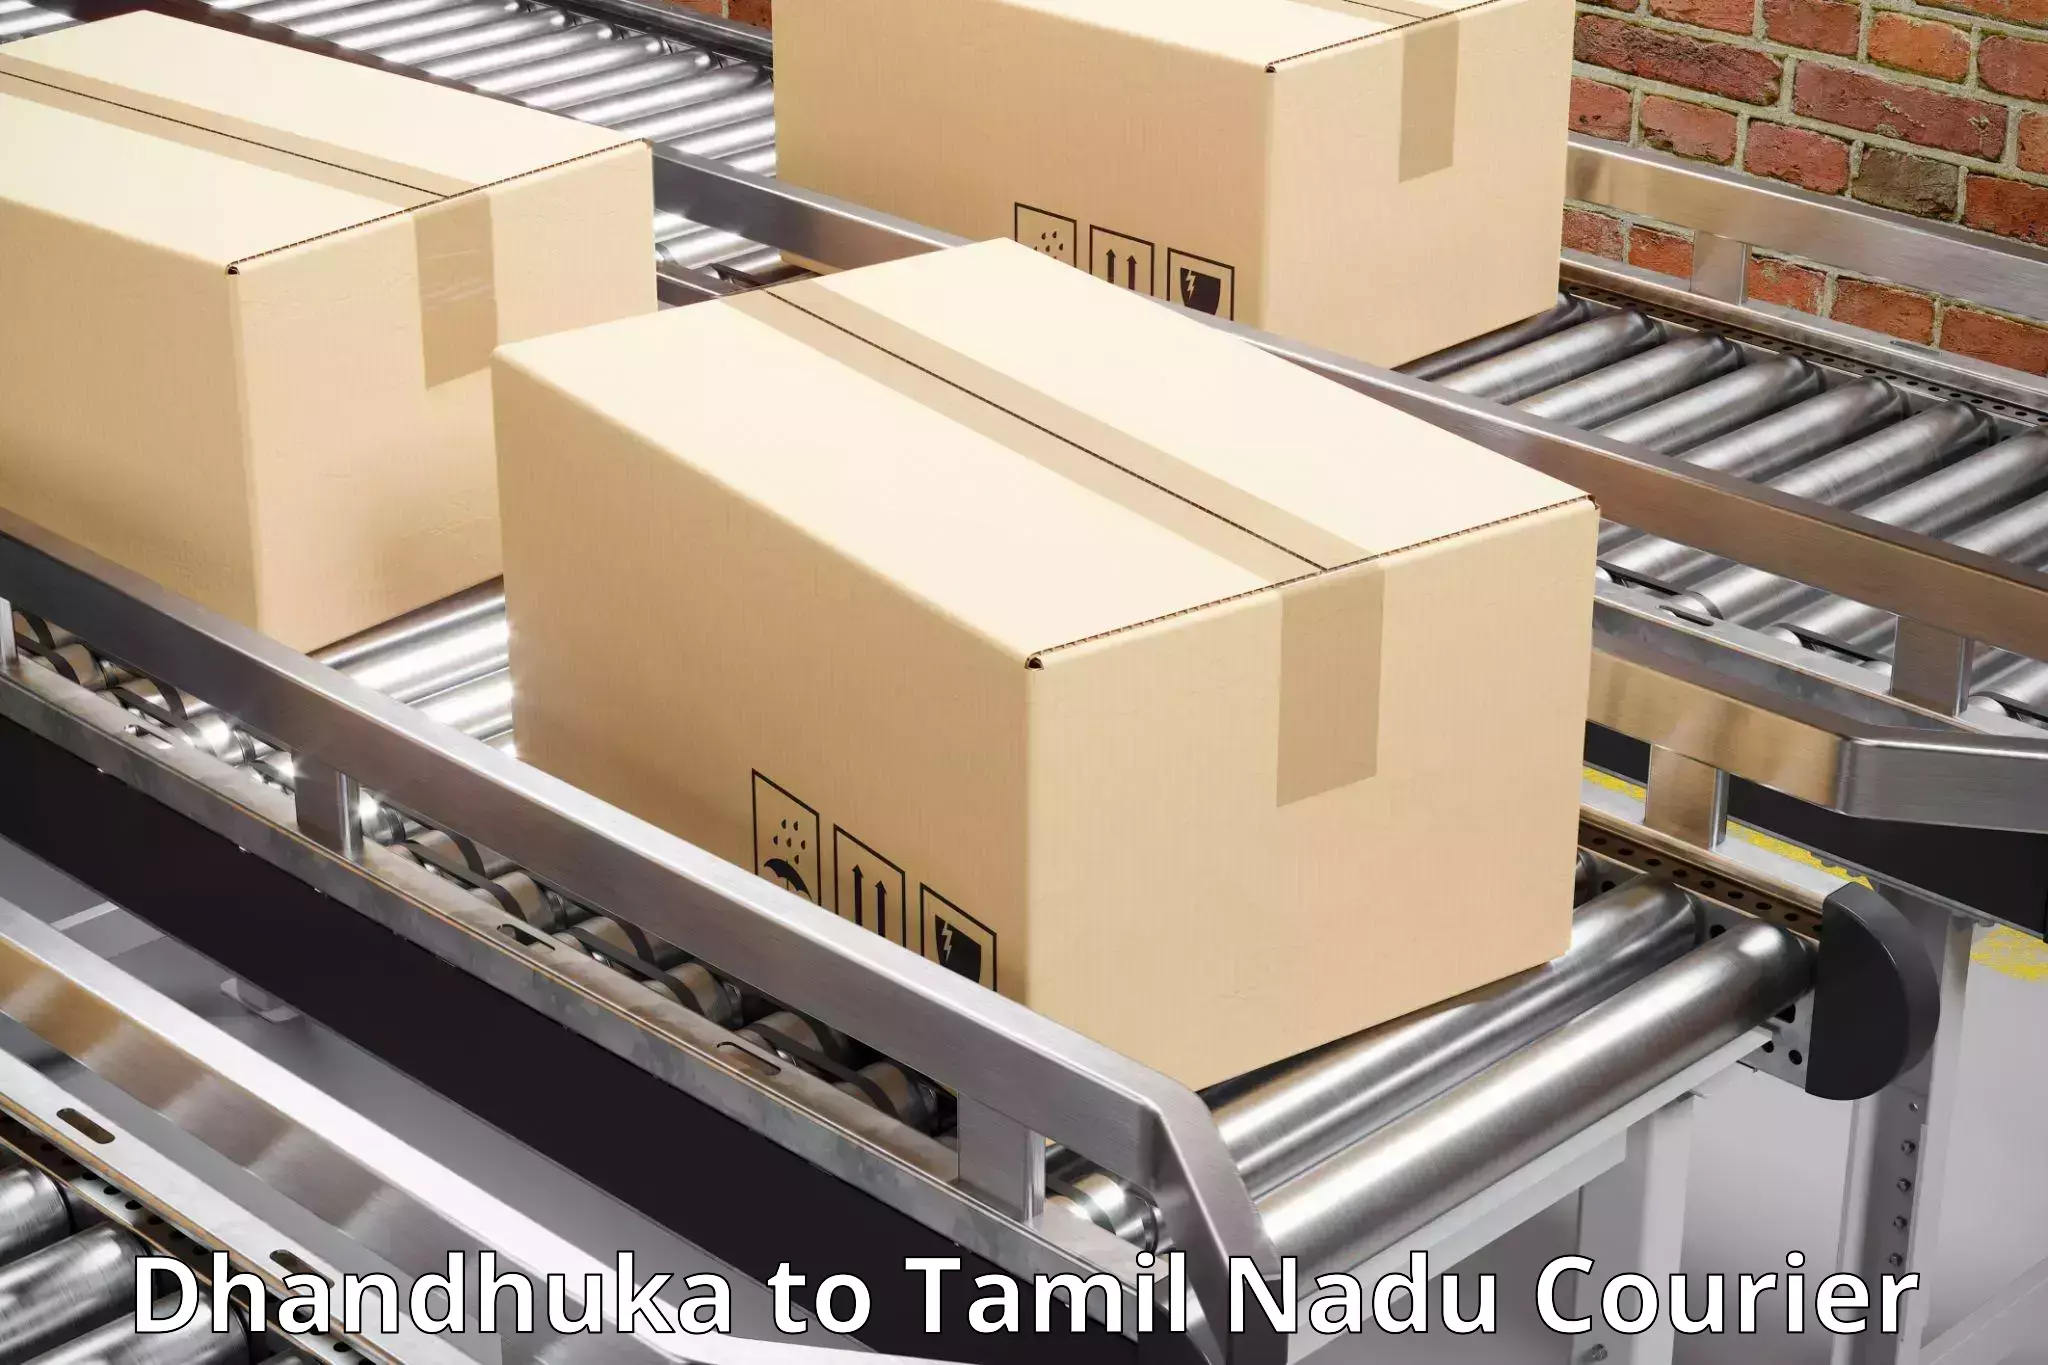 Automated shipping Dhandhuka to Vellore